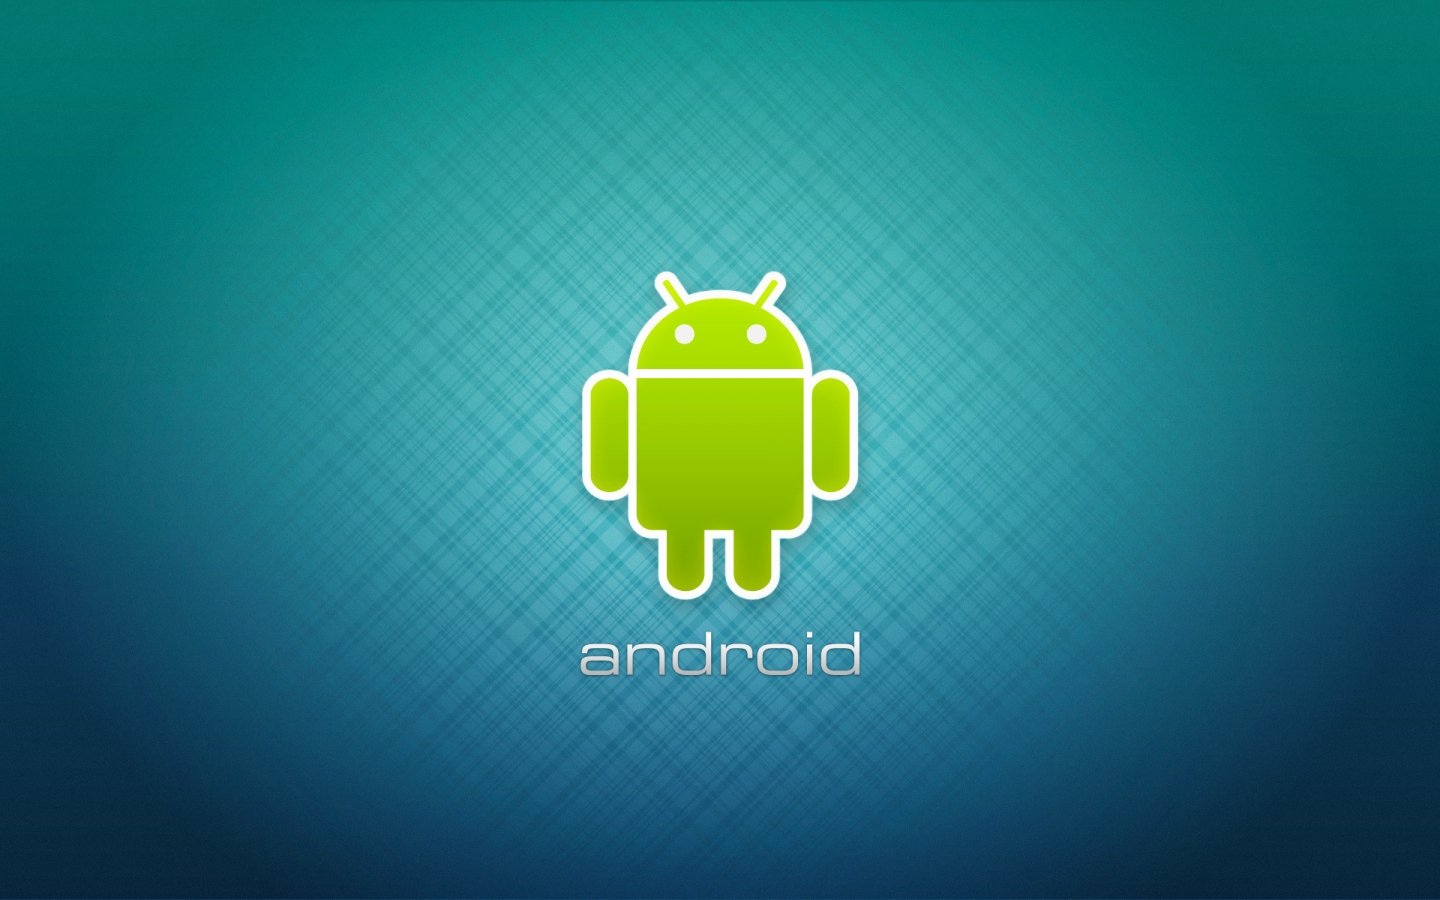 Just Android Logo for 1440 x 900 widescreen resolution